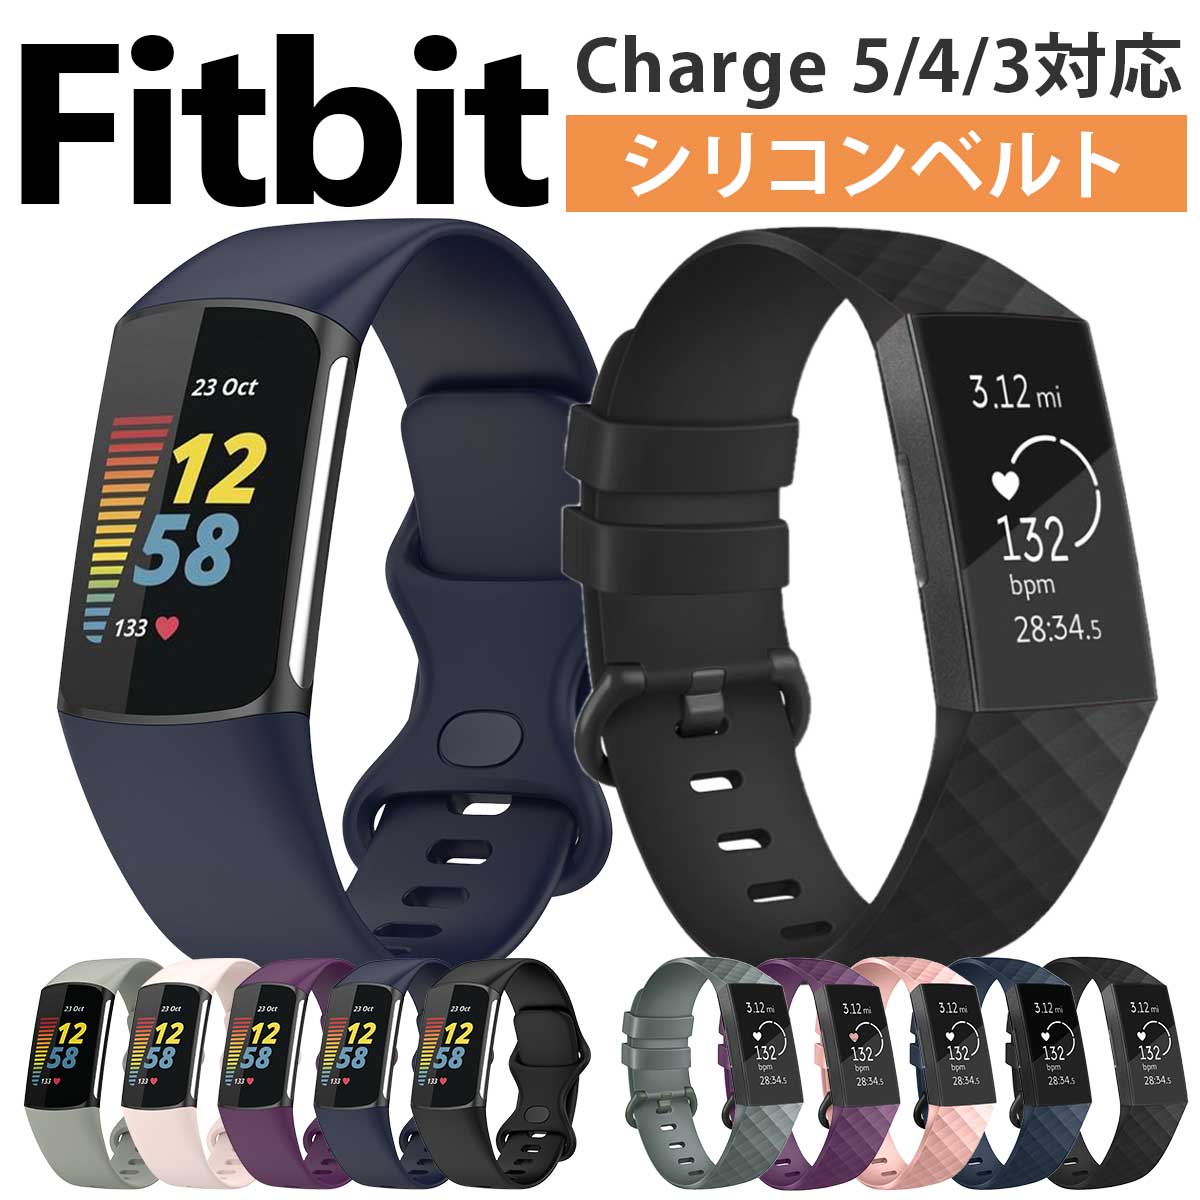 Fitbit Charge3 Charge4 Charge5 バンド ベルト 交換 シリコン